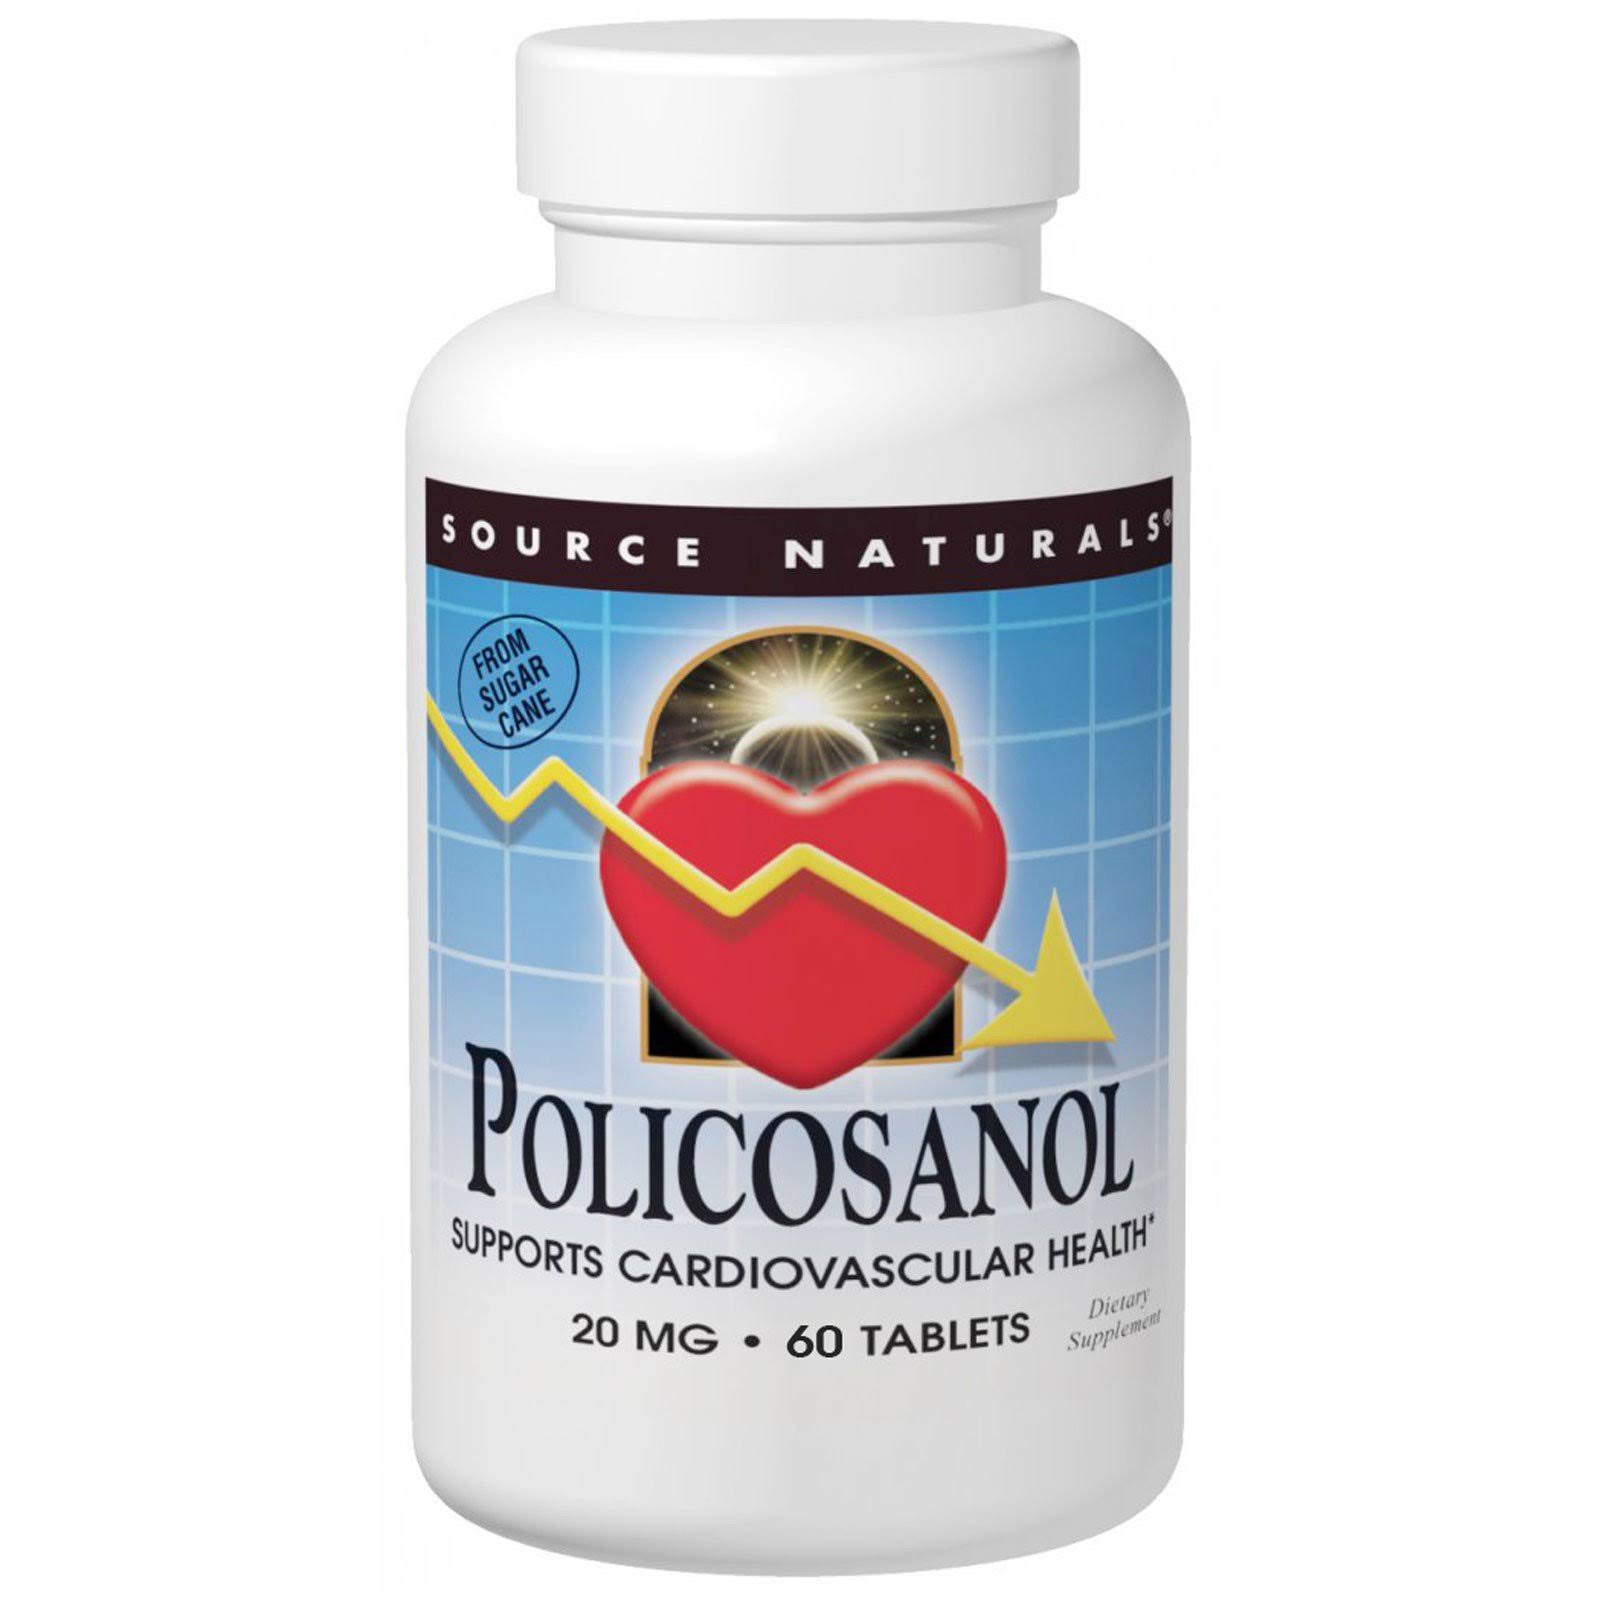 Source Naturals Policosanol Dietary Supplement - 20mg, 60ct